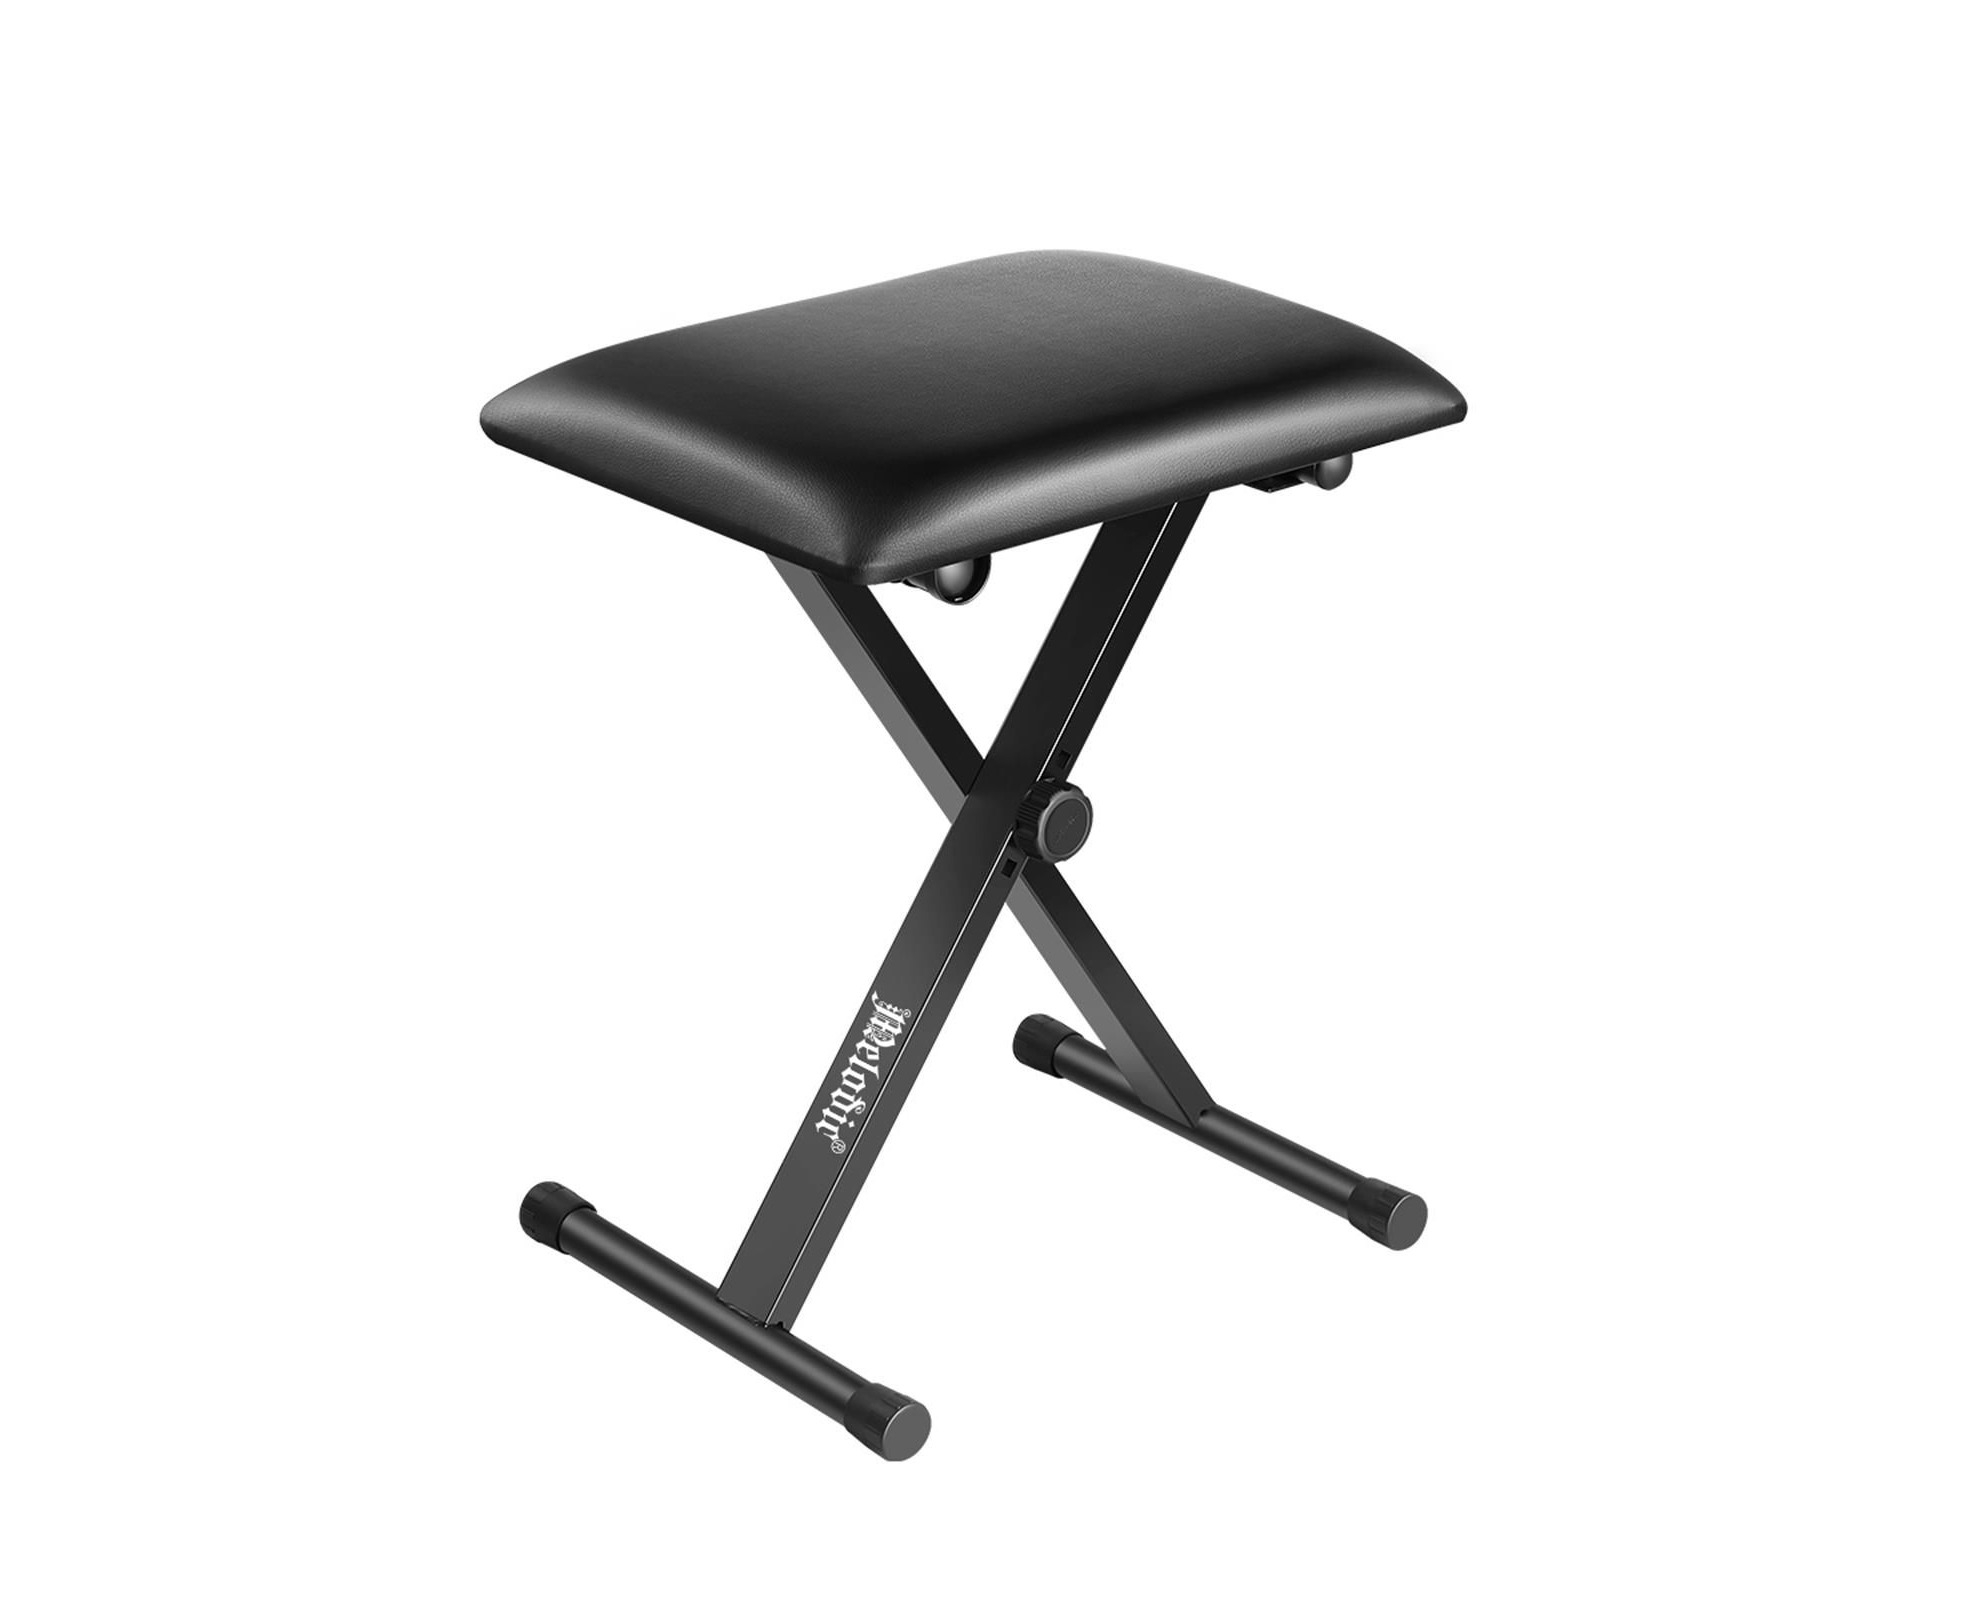 Adjustable Folding Stool Chair Bench Leather Padded Seat Black for Piano Keyboard 